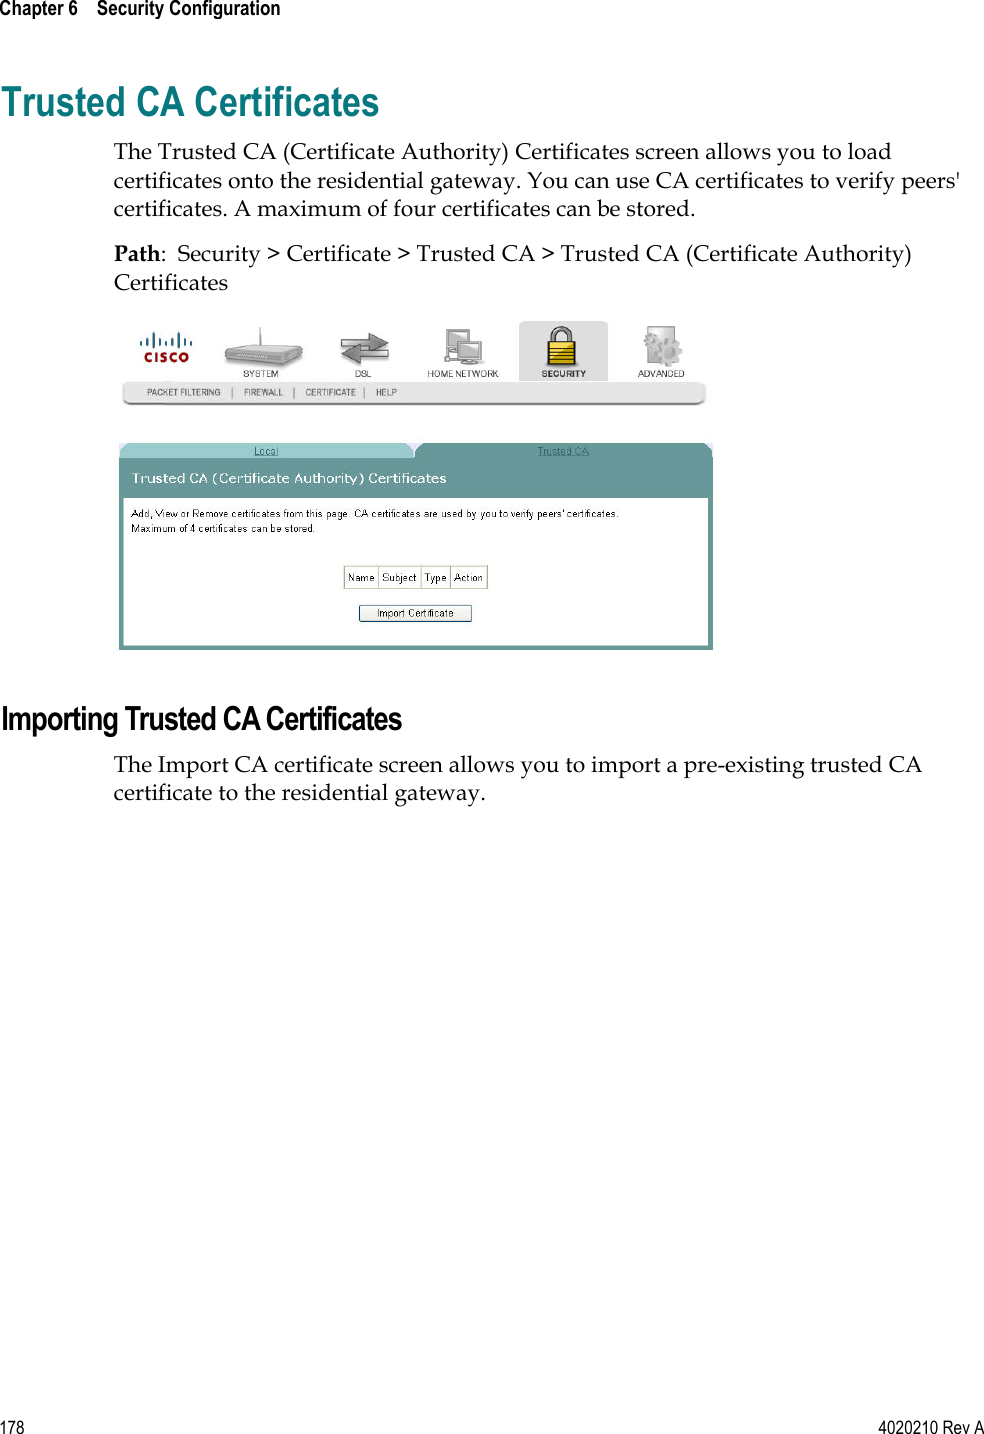  Chapter 6    Security Configuration   178  4020210 Rev A Trusted CA Certificates The Trusted CA (Certificate Authority) Certificates screen allows you to load certificates onto the residential gateway. You can use CA certificates to verify peers&apos; certificates. A maximum of four certificates can be stored. Path:  Security &gt; Certificate &gt; Trusted CA &gt; Trusted CA (Certificate Authority) Certificates   Importing Trusted CA Certificates The Import CA certificate screen allows you to import a pre-existing trusted CA certificate to the residential gateway. 